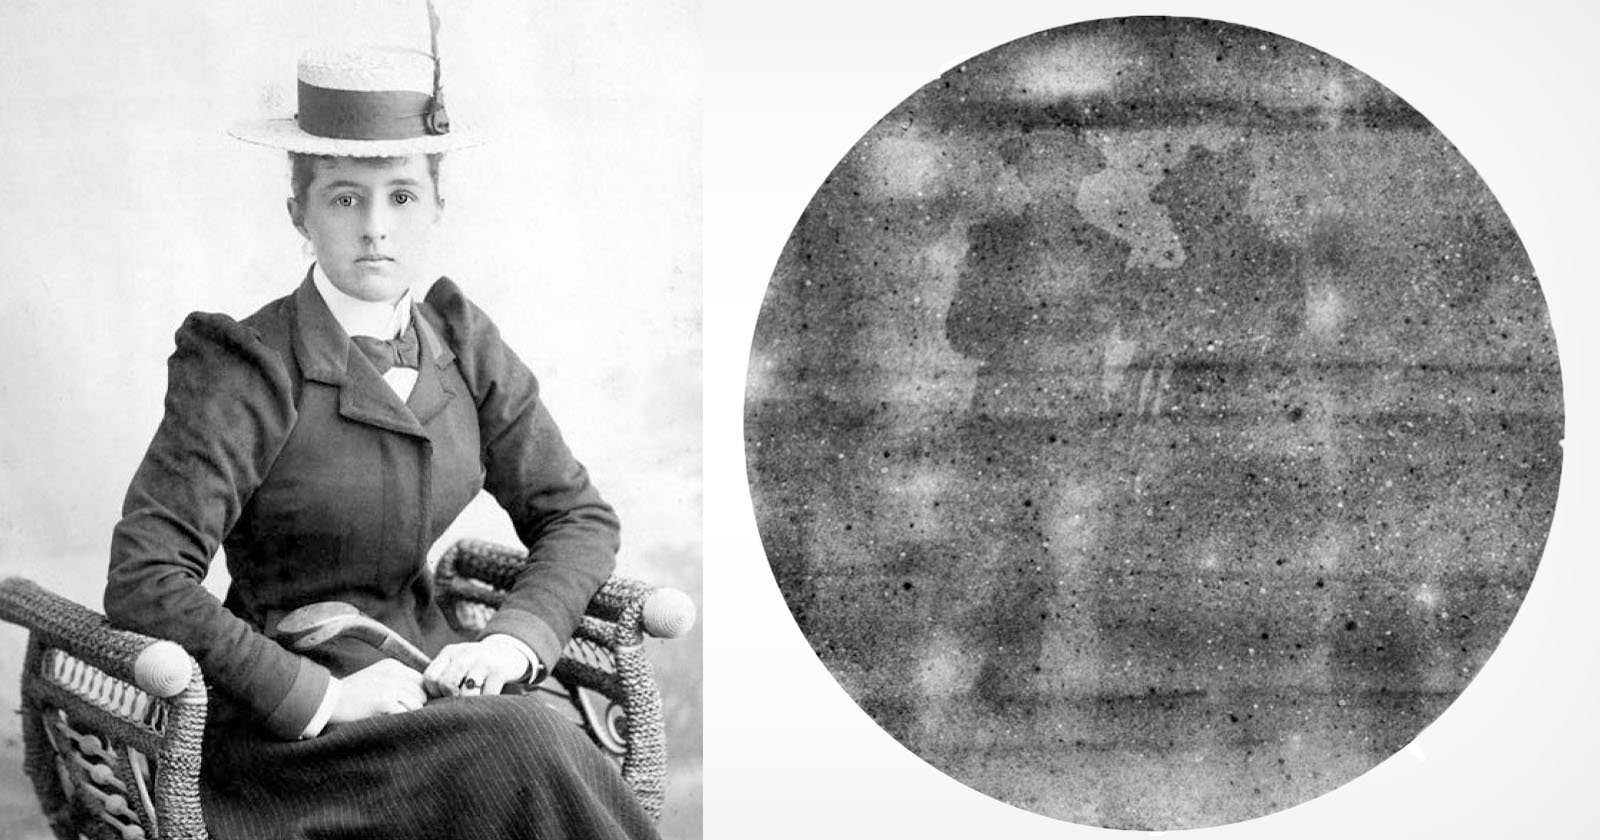  134-year-old photo oldest ever developed 